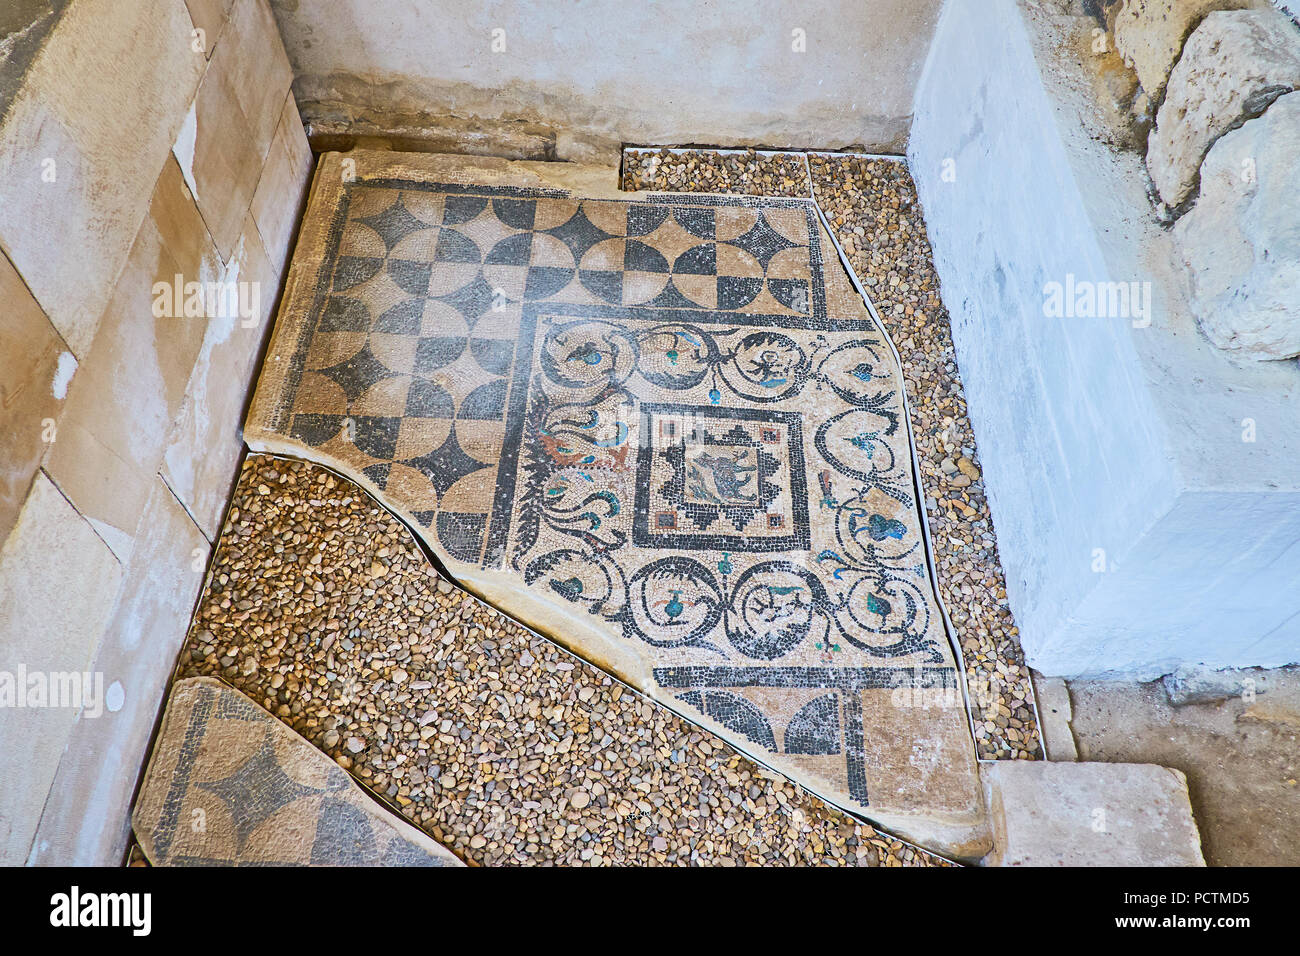 Alexandria Egypt Mosaic High Resolution Stock Photography And Images Alamy